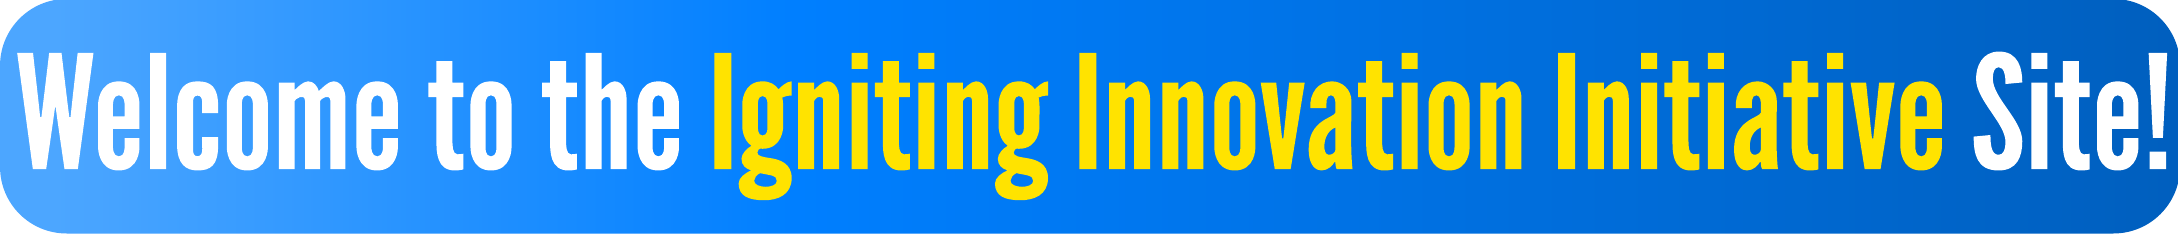 Welcome to the Igniting Innovation Initiative Site!